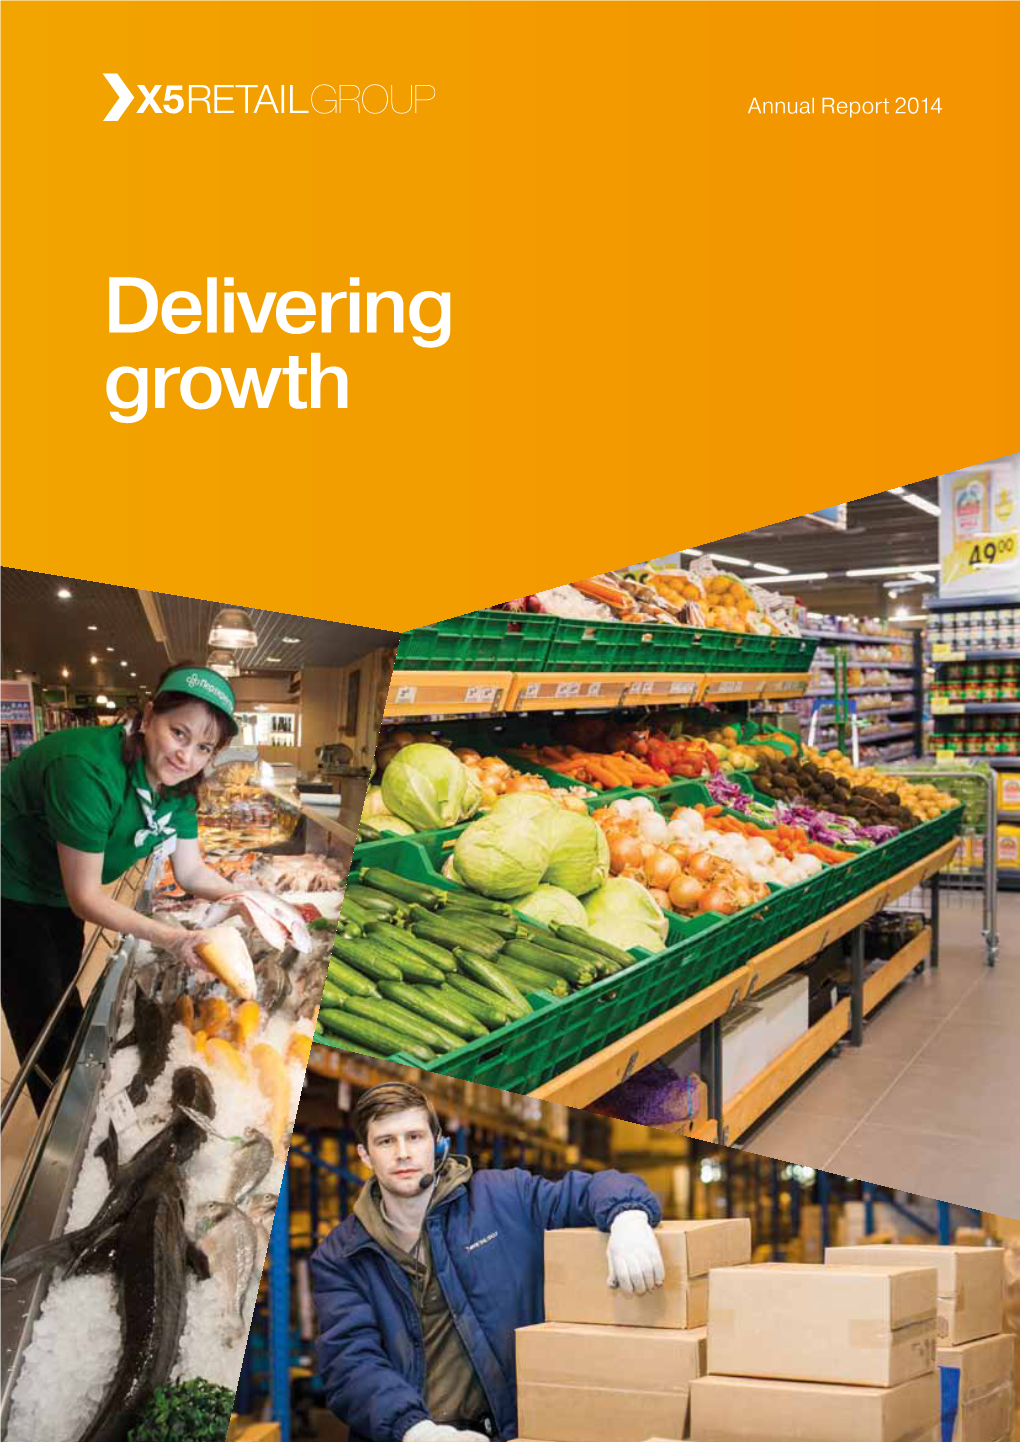 Delivering Growth Delivering Growth in 2014 We Remained Focused on Strengthening Retail Basics, Building the Right Team and Fine Tuning the +15.7% Operational Model